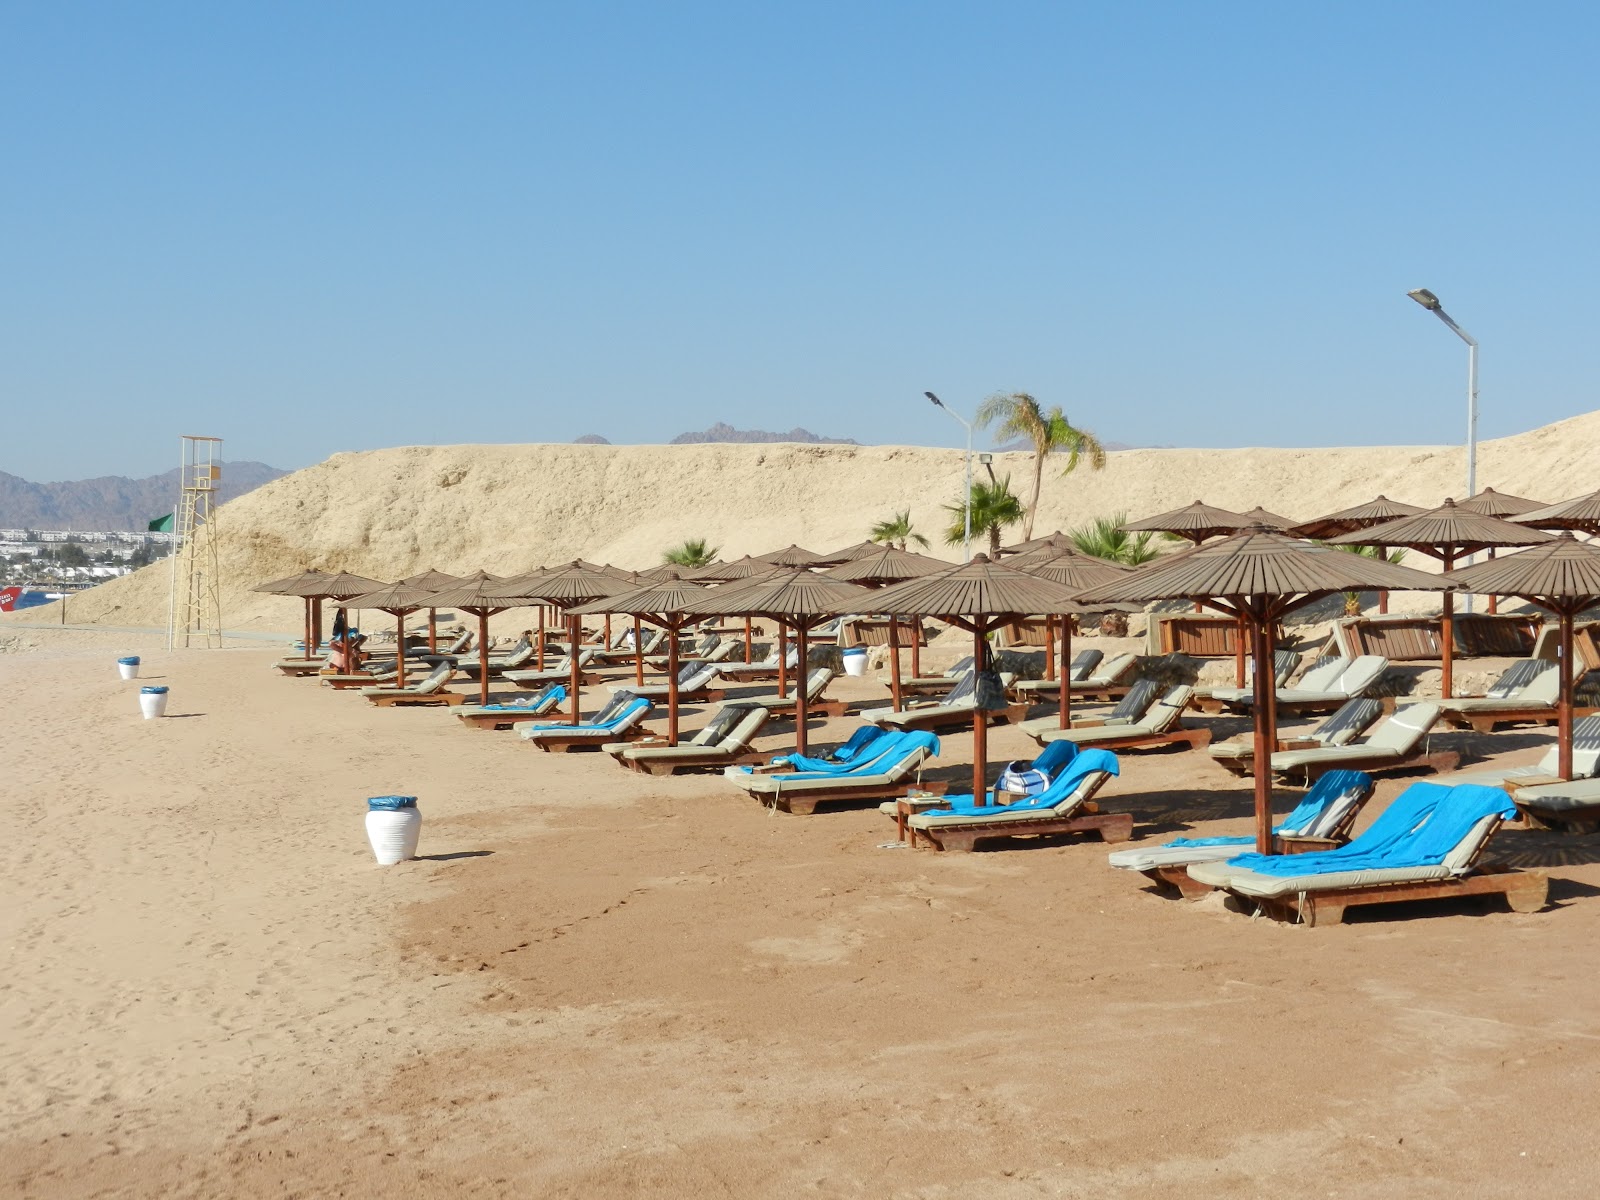 Photo of Movenpick Resort beach - popular place among relax connoisseurs